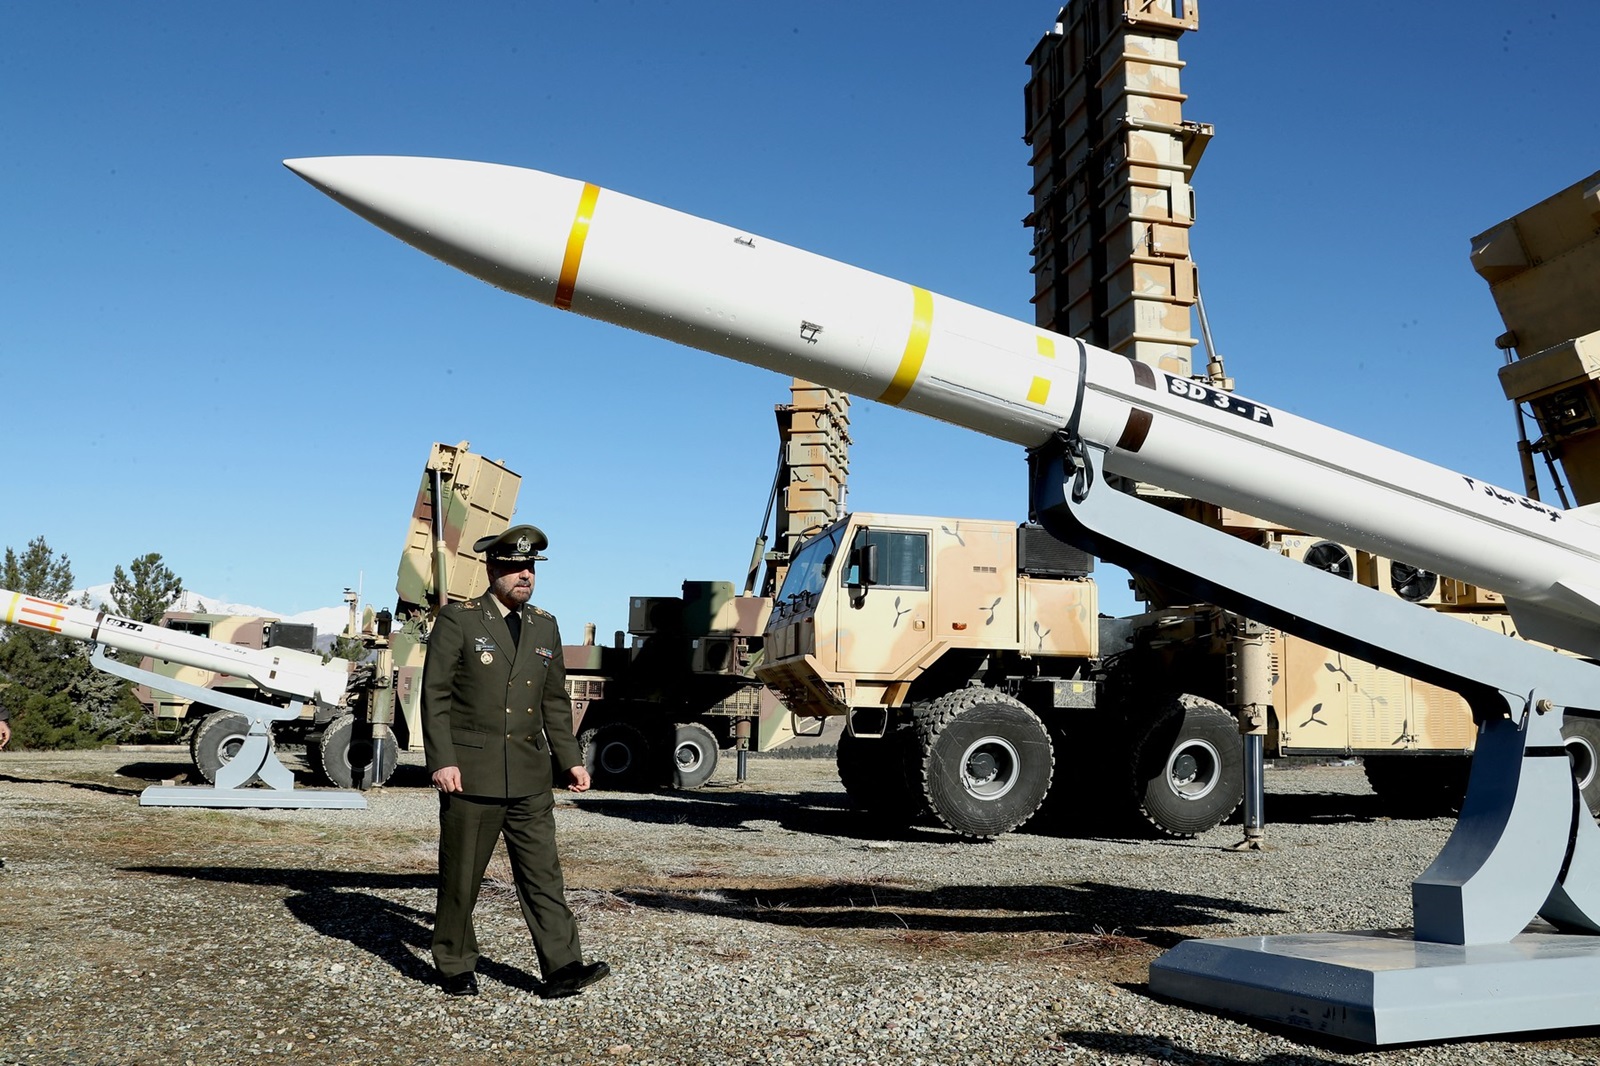 This handout picture provided by the Iranian Defence Ministry on February 17, 2024 shows a Sayad-3 missile during the unveiling of the Arman defense systems at an undisclosed location.,Image: 847584594, License: Rights-managed, Restrictions: RESTRICTED TO EDITORIAL USE - MANDATORY CREDIT "AFP PHOTO / IRANIAN DEFENCE MINISTRY" - NO MARKETING NO ADVERTISING CAMPAIGNS - DISTRIBUTED AS A SERVICE TO CLIENTS, ***
HANDOUT image or SOCIAL MEDIA IMAGE or FILMSTILL for EDITORIAL USE ONLY! * Please note: Fees charged by Profimedia are for the Profimedia's services only, and do not, nor are they intended to, convey to the user any ownership of Copyright or License in the material. Profimedia does not claim any ownership including but not limited to Copyright or License in the attached material. By publishing this material you (the user) expressly agree to indemnify and to hold Profimedia and its directors, shareholders and employees harmless from any loss, claims, damages, demands, expenses (including legal fees), or any causes of action or allegation against Profimedia arising out of or connected in any way with publication of the material. Profimedia does not claim any copyright or license in the attached materials. Any downloading fees charged by Profimedia are for Profimedia's services only. * Handling Fee Only 
***, Model Release: no, Credit line: AFP / AFP / Profimedia